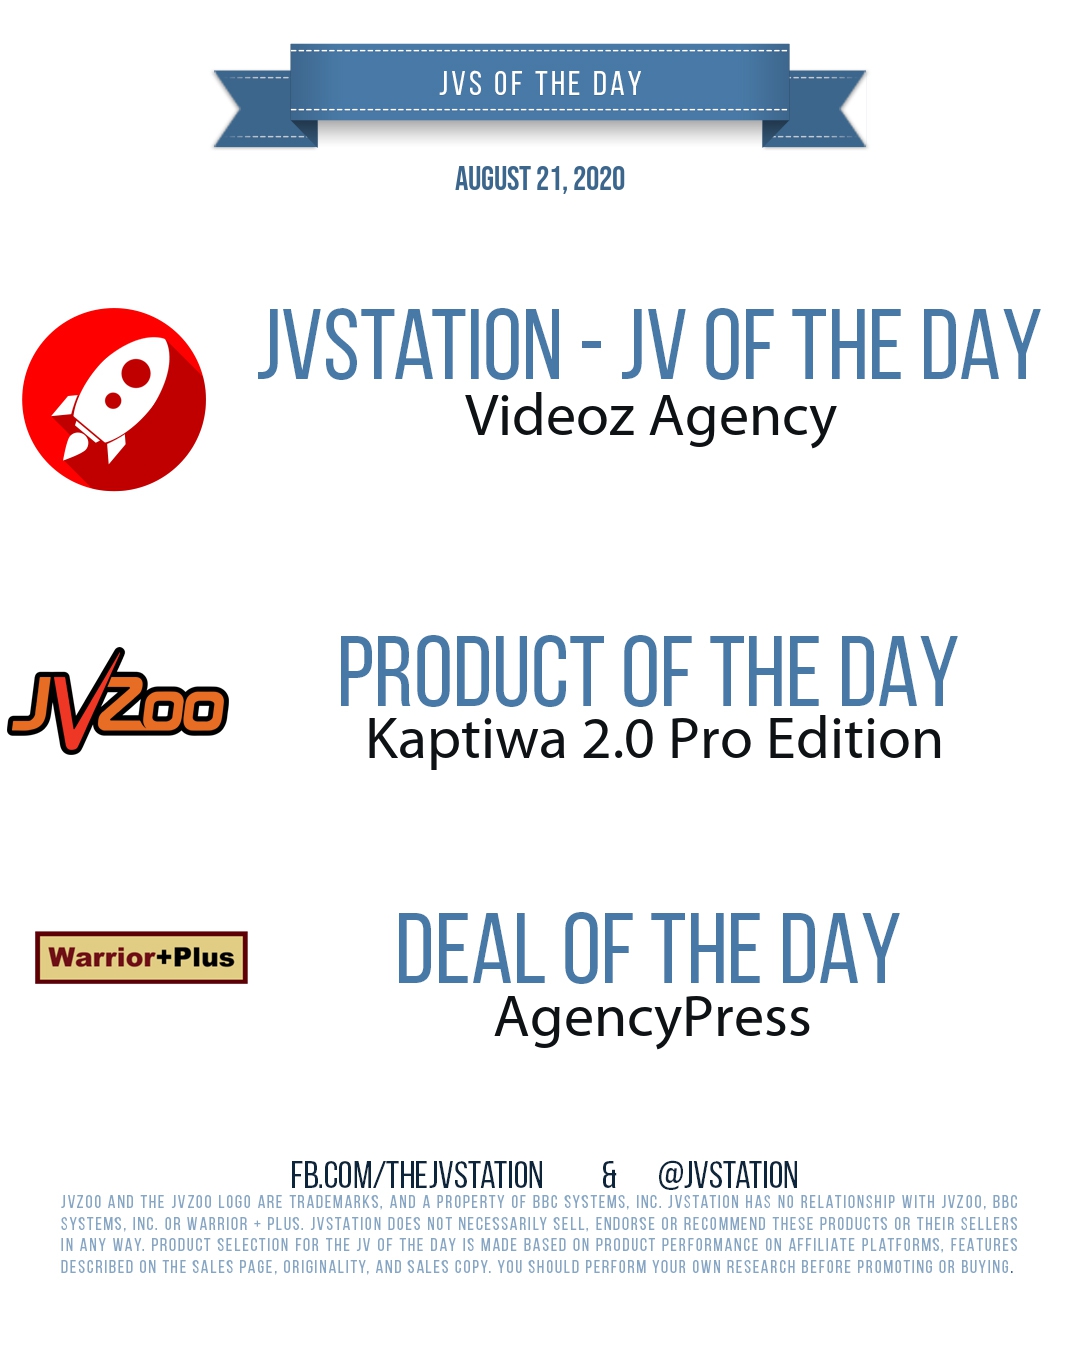 JVs of the day - August 21, 2020